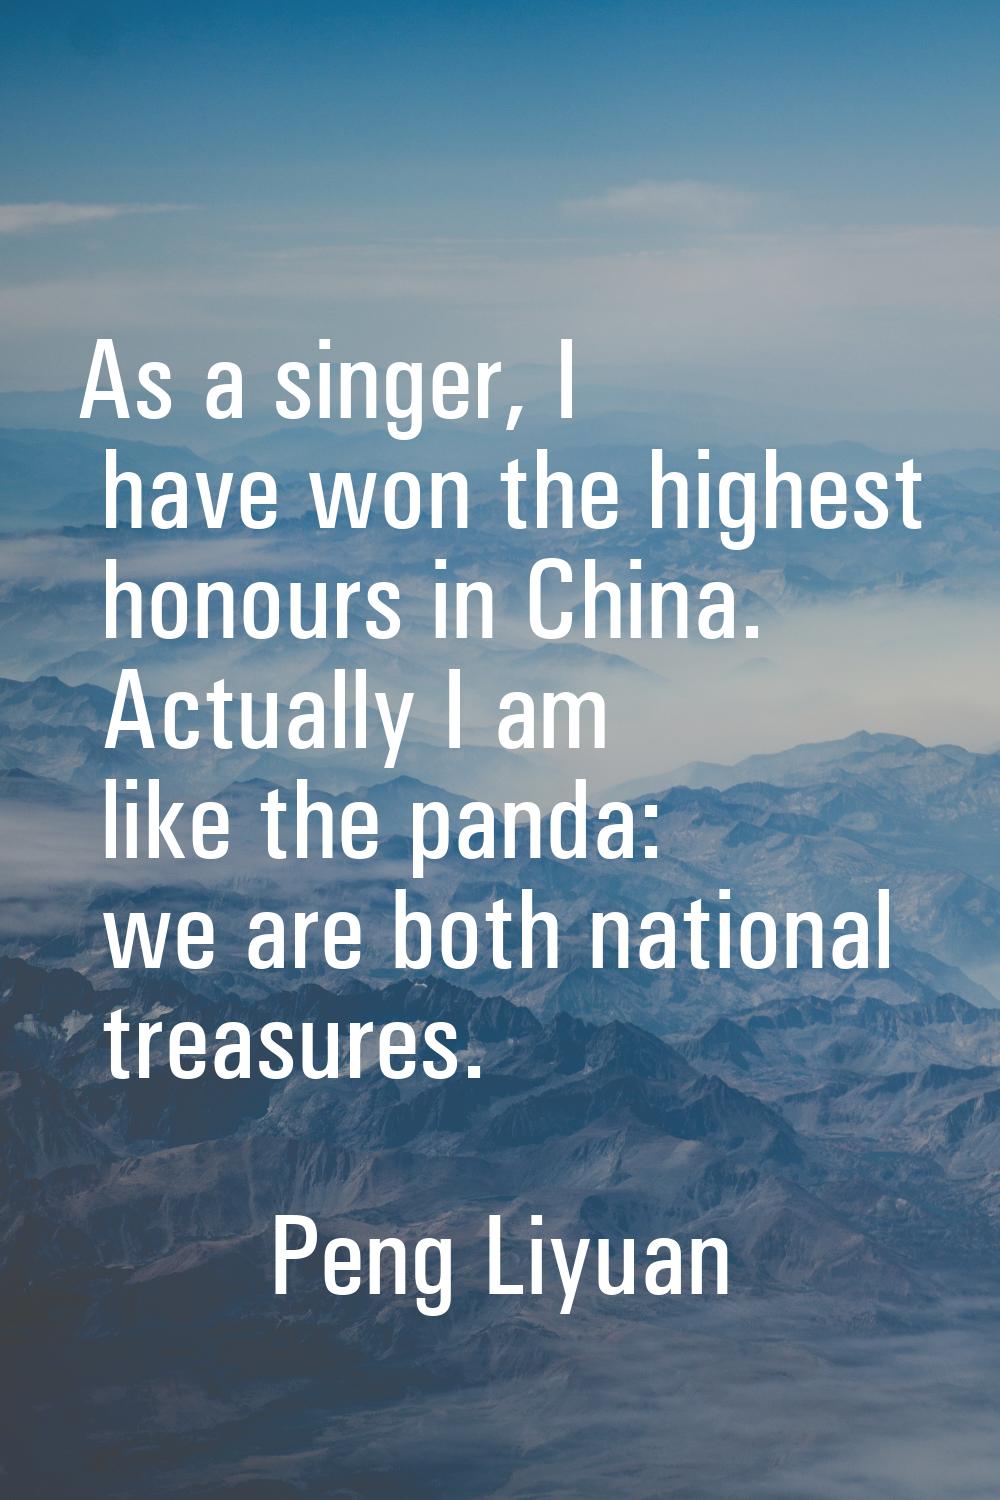 As a singer, I have won the highest honours in China. Actually I am like the panda: we are both nat